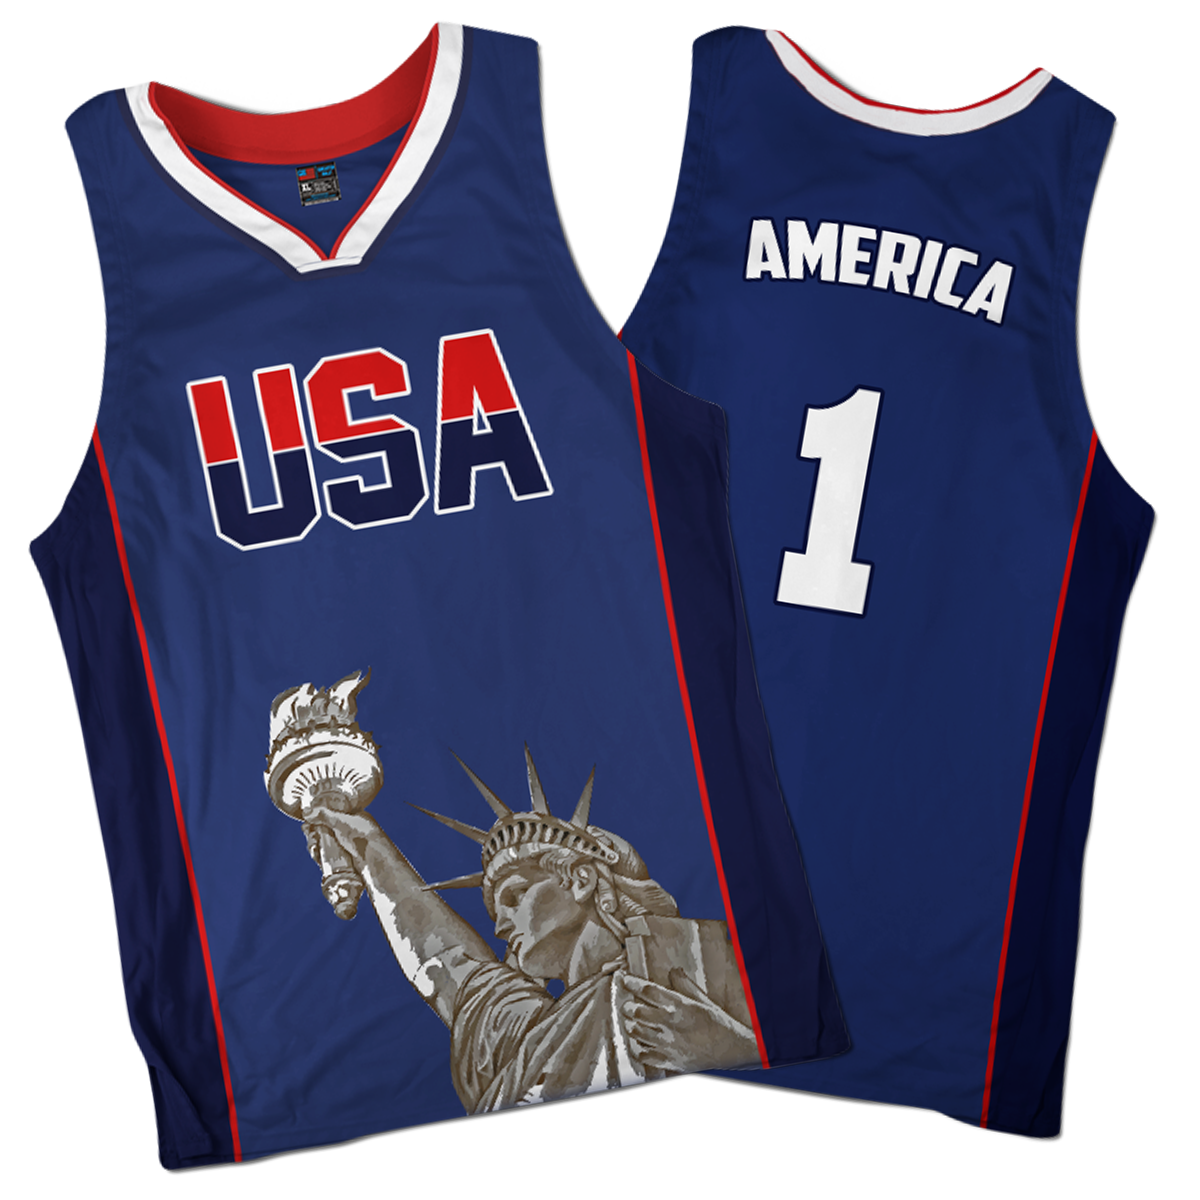 America #1 Basketball Jersey (Red, White & Blue) - USA Drinking Team